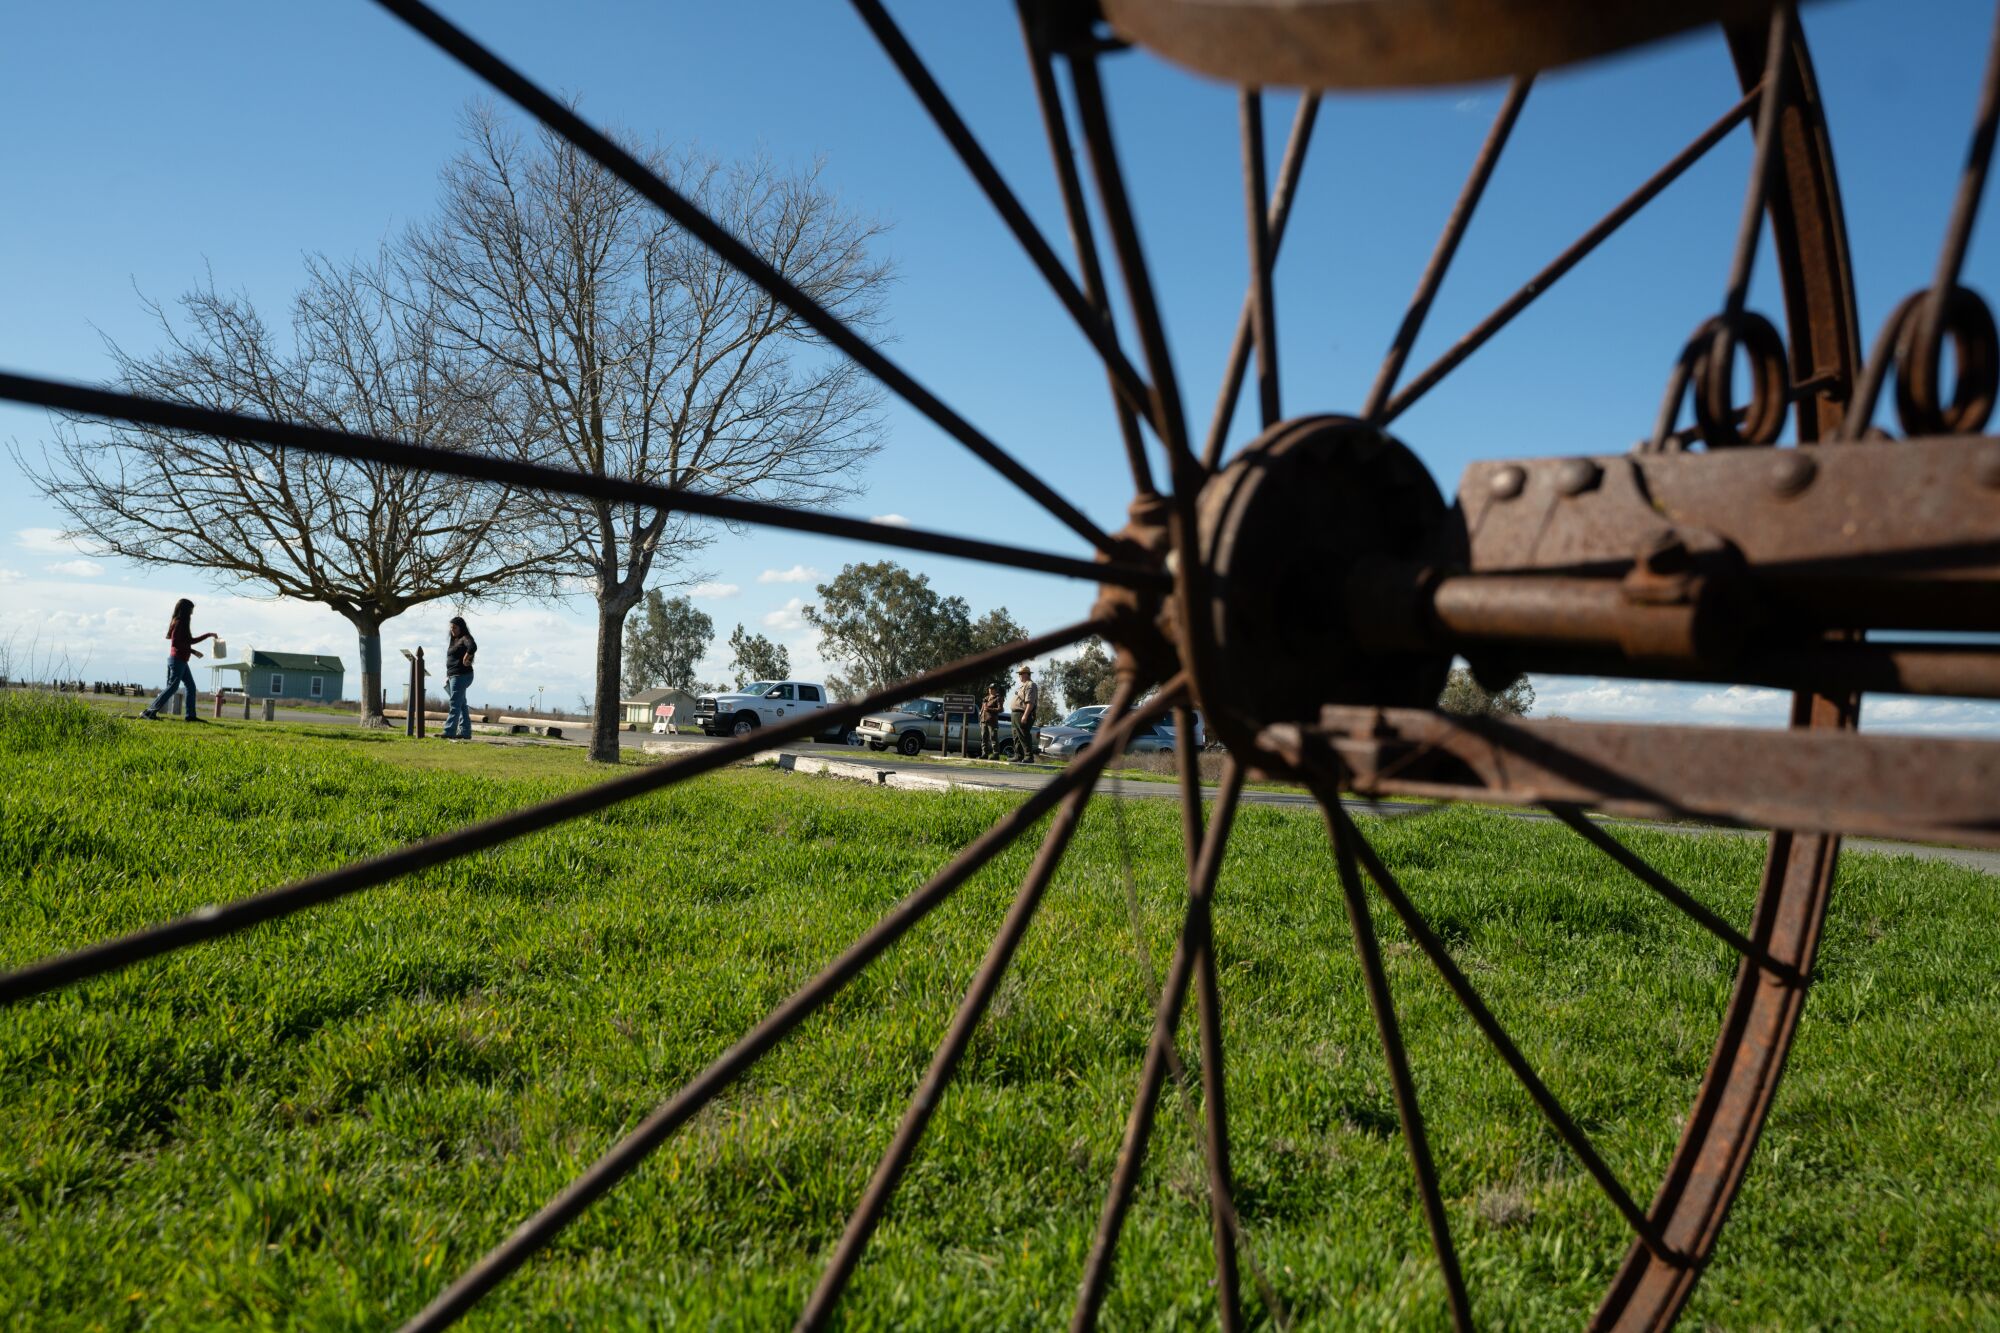 A rusted piece of farm equipment frames visitors to Colonel Allensworth State Historic Park.